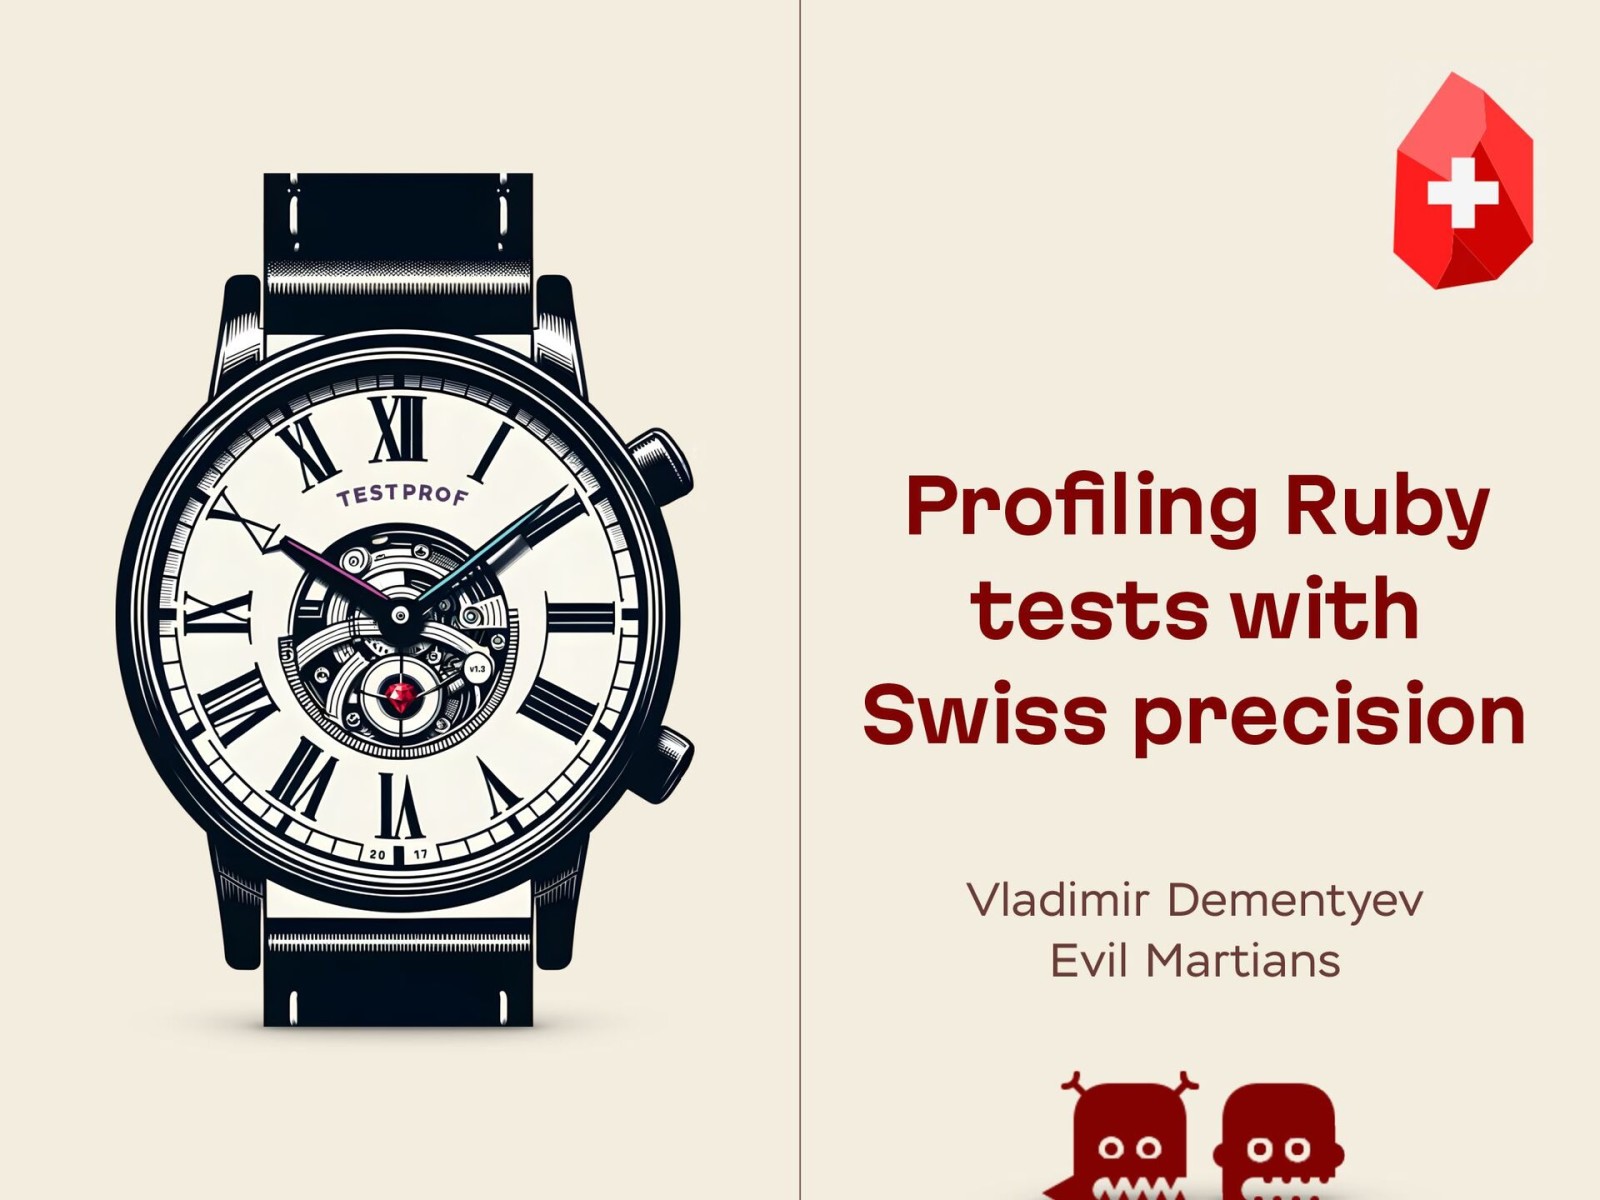 Profiling Ruby tests with Swiss precision